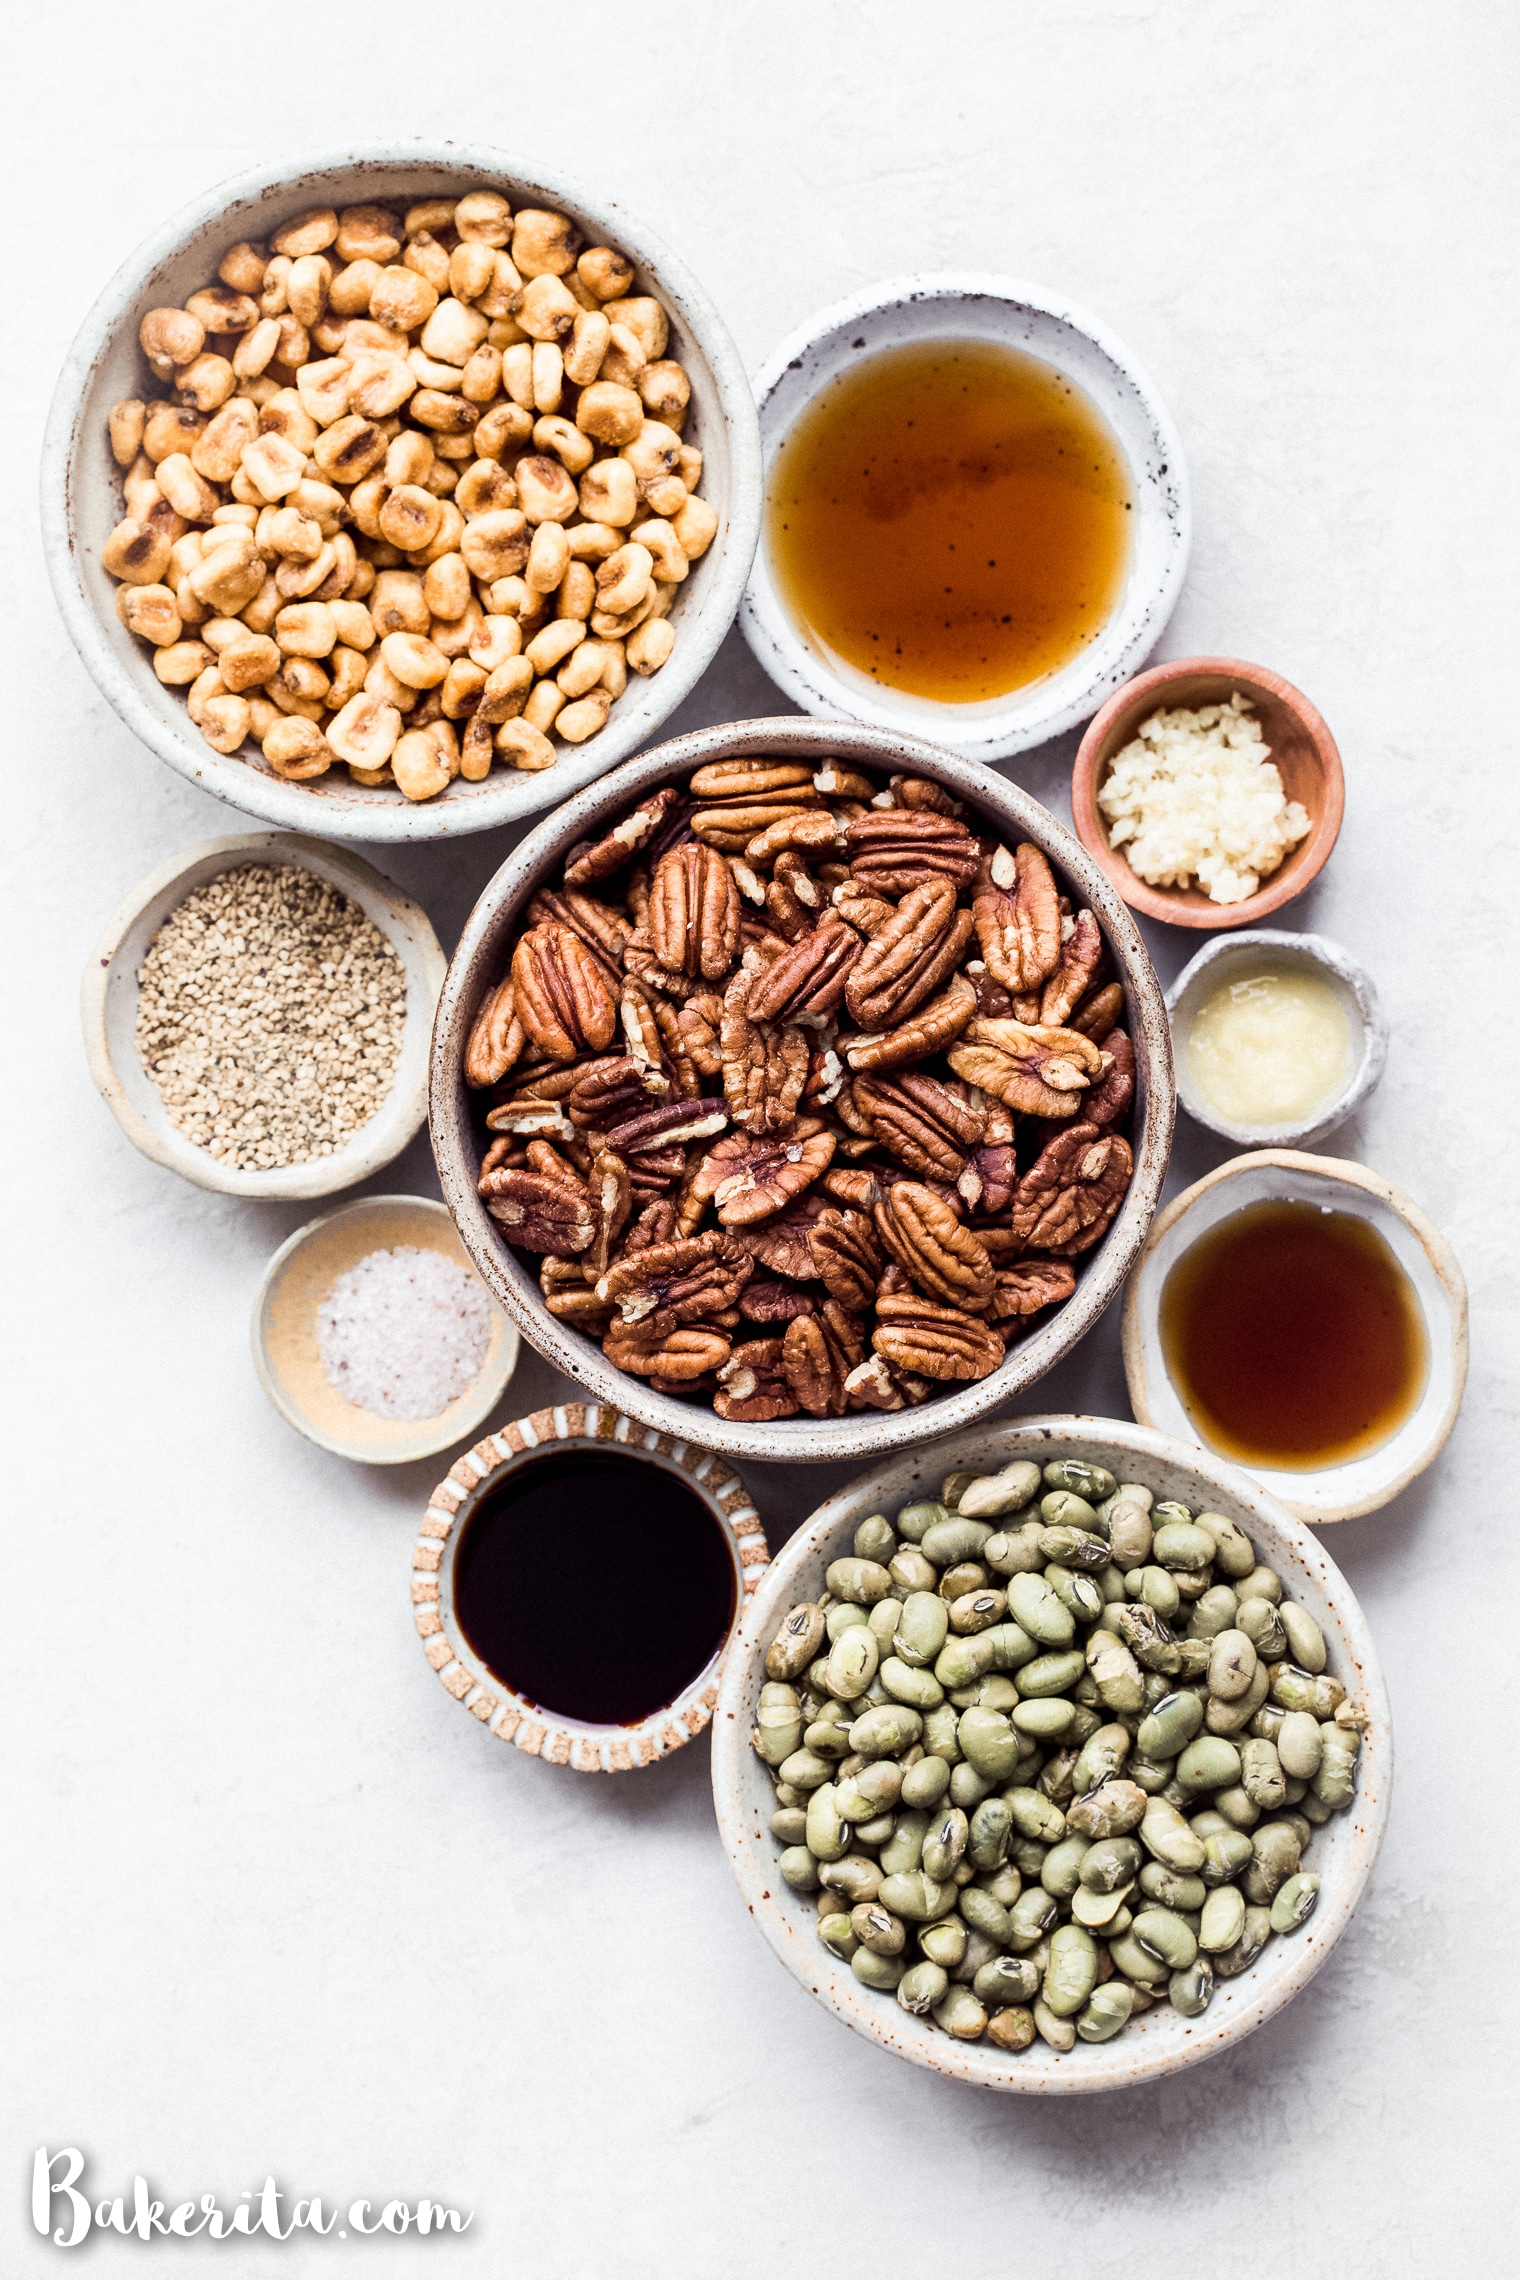 This Sesame Tamari Pecan Snack Mix is a deliciously crunchy snack that's bursting with sweet, savory, and umami flavors. It's gluten-free and vegan!